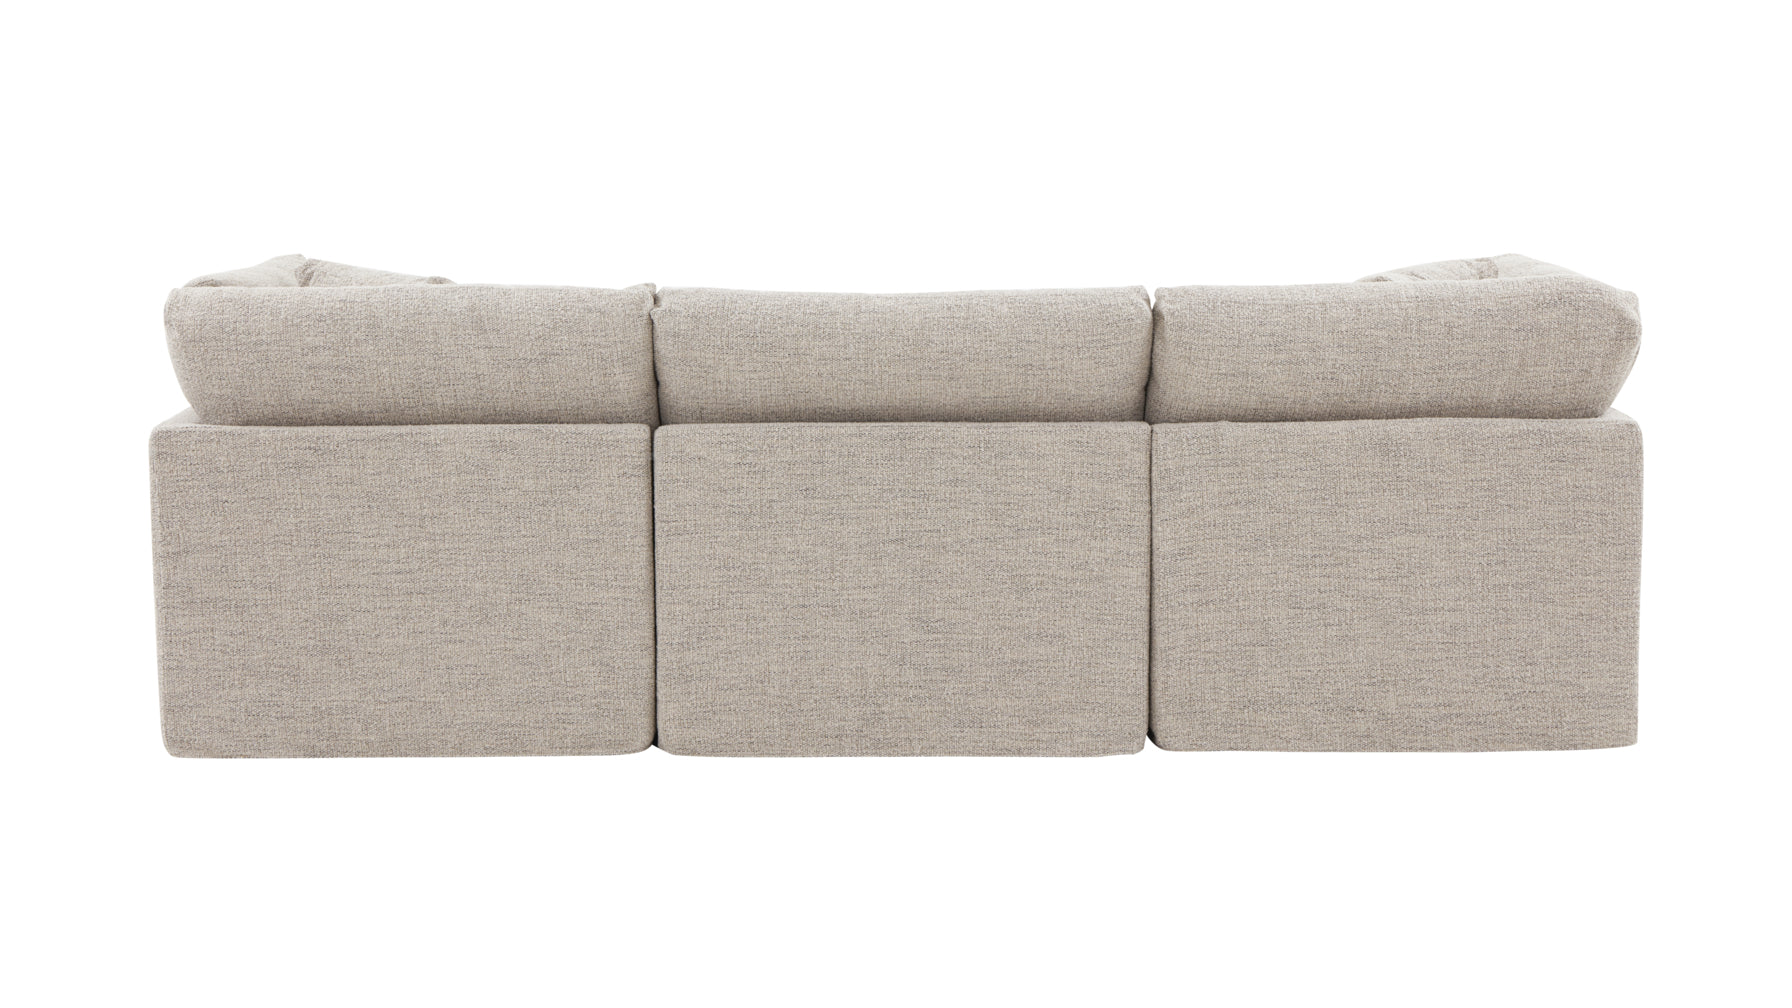 Get Together™ 4-Piece Modular Sectional, Standard, Oatmeal - Image 7